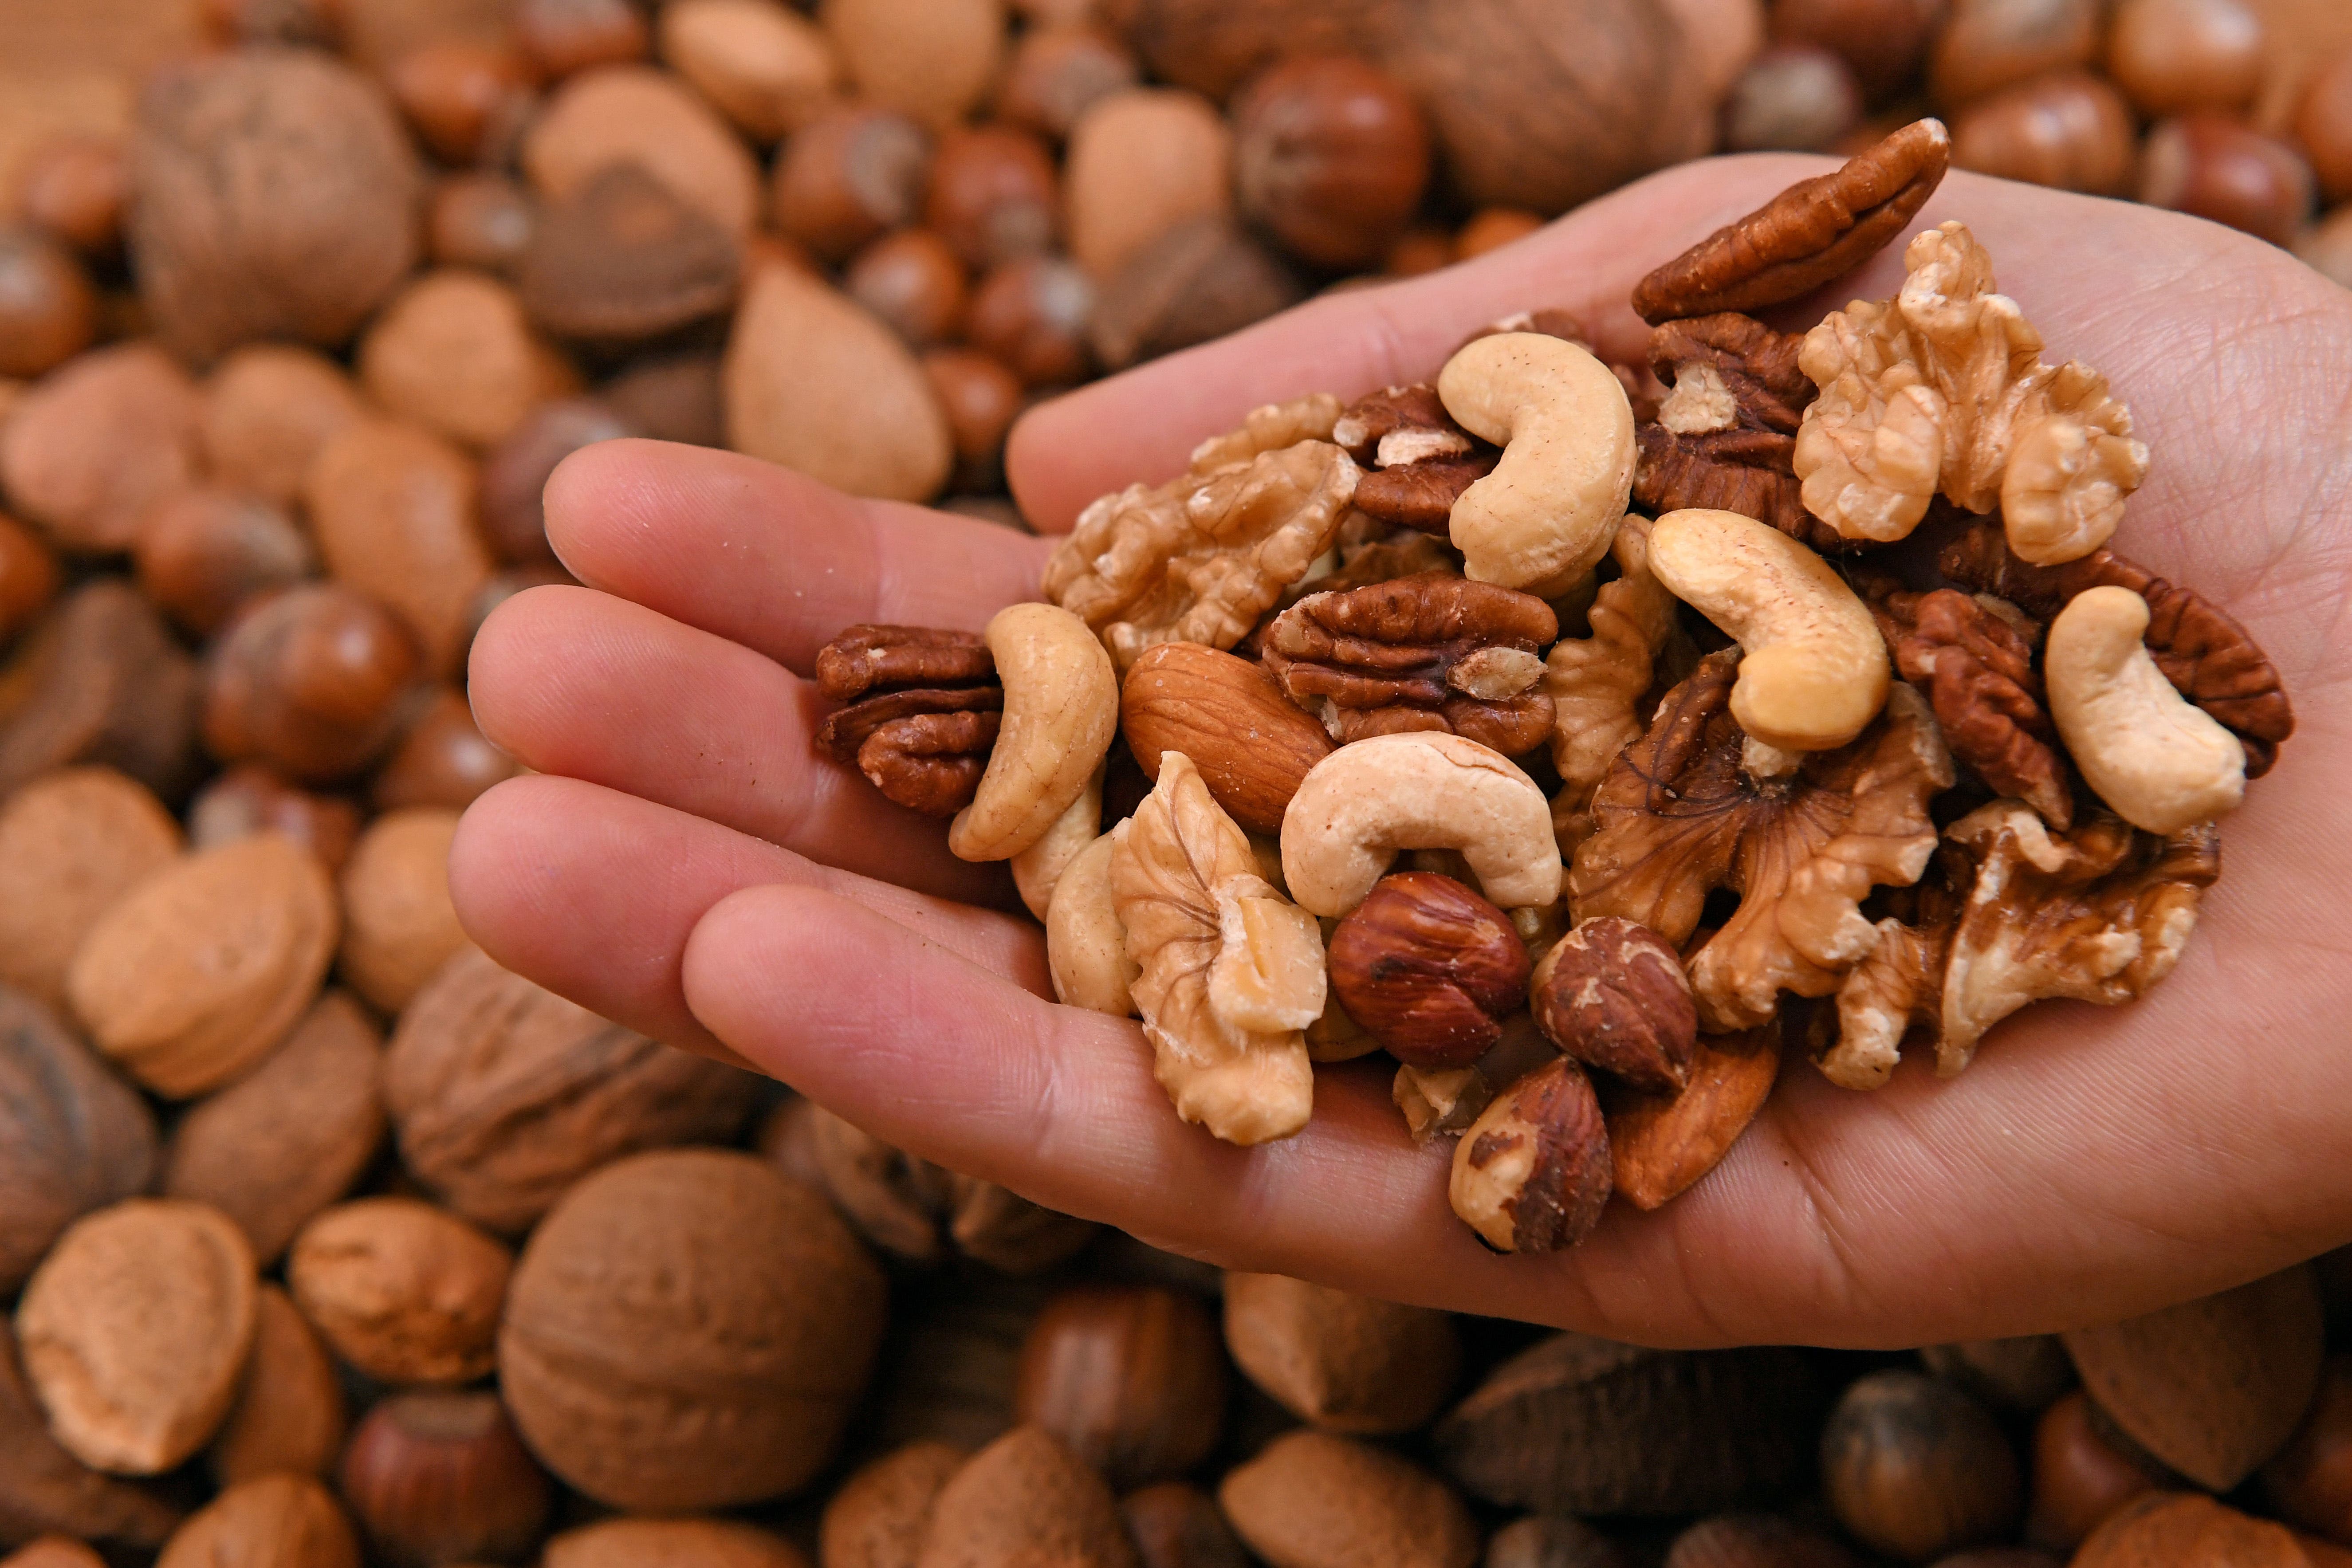 Having nuts instead of eggs could reduce the risk of heart attacks and stroke